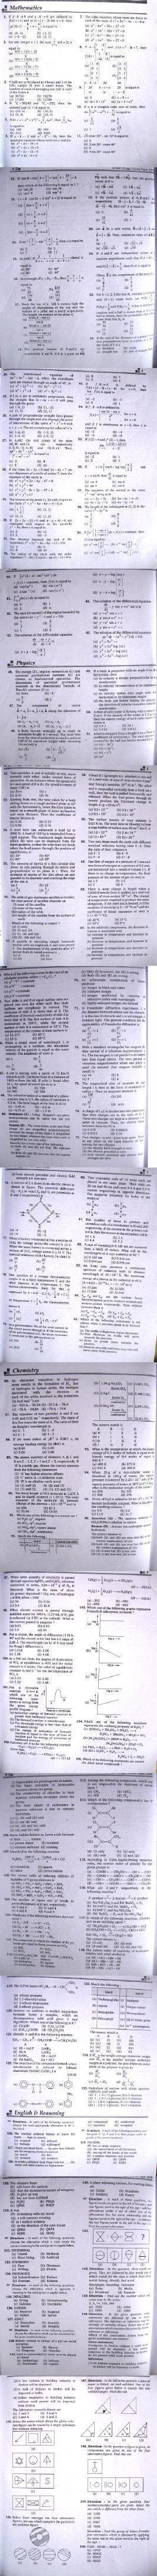 BITSAT 2008 Question Paper with Answers